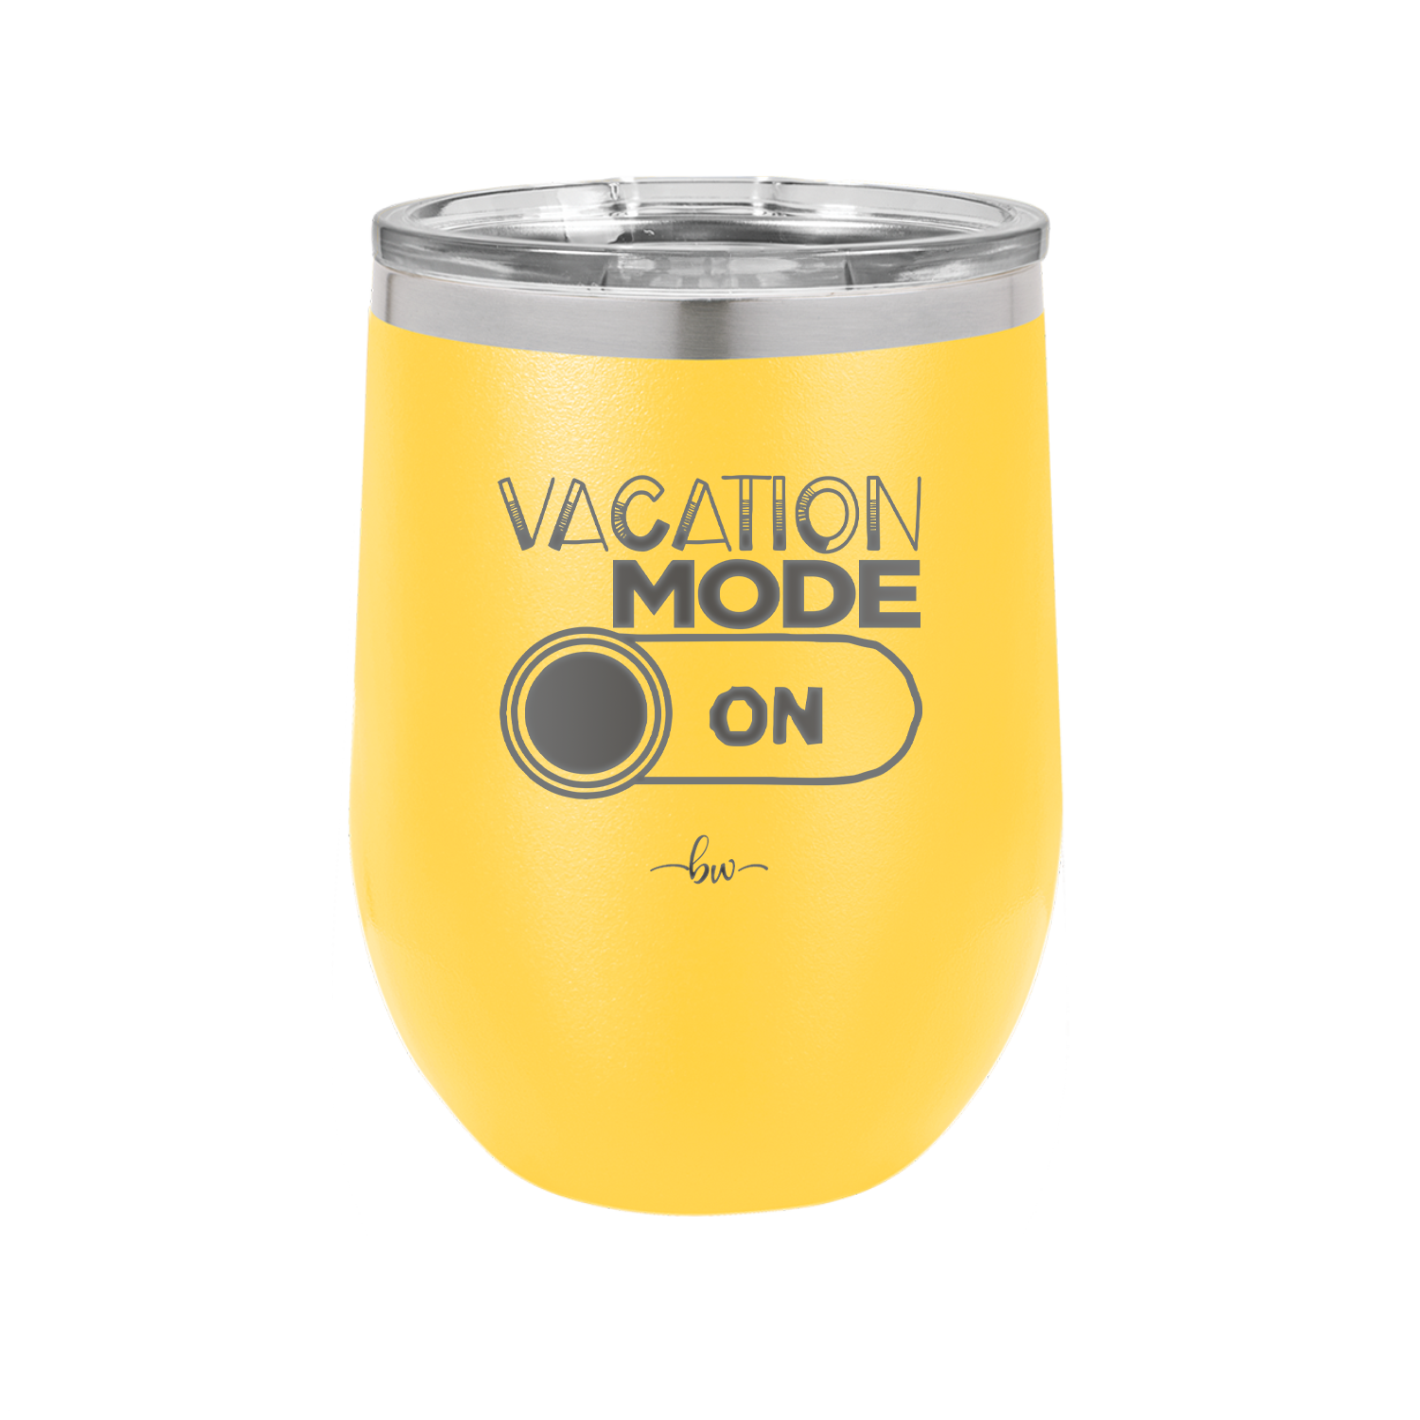 Vacaton Mode ON - Laser Engraved Stainless Steel Drinkware - 1958 -